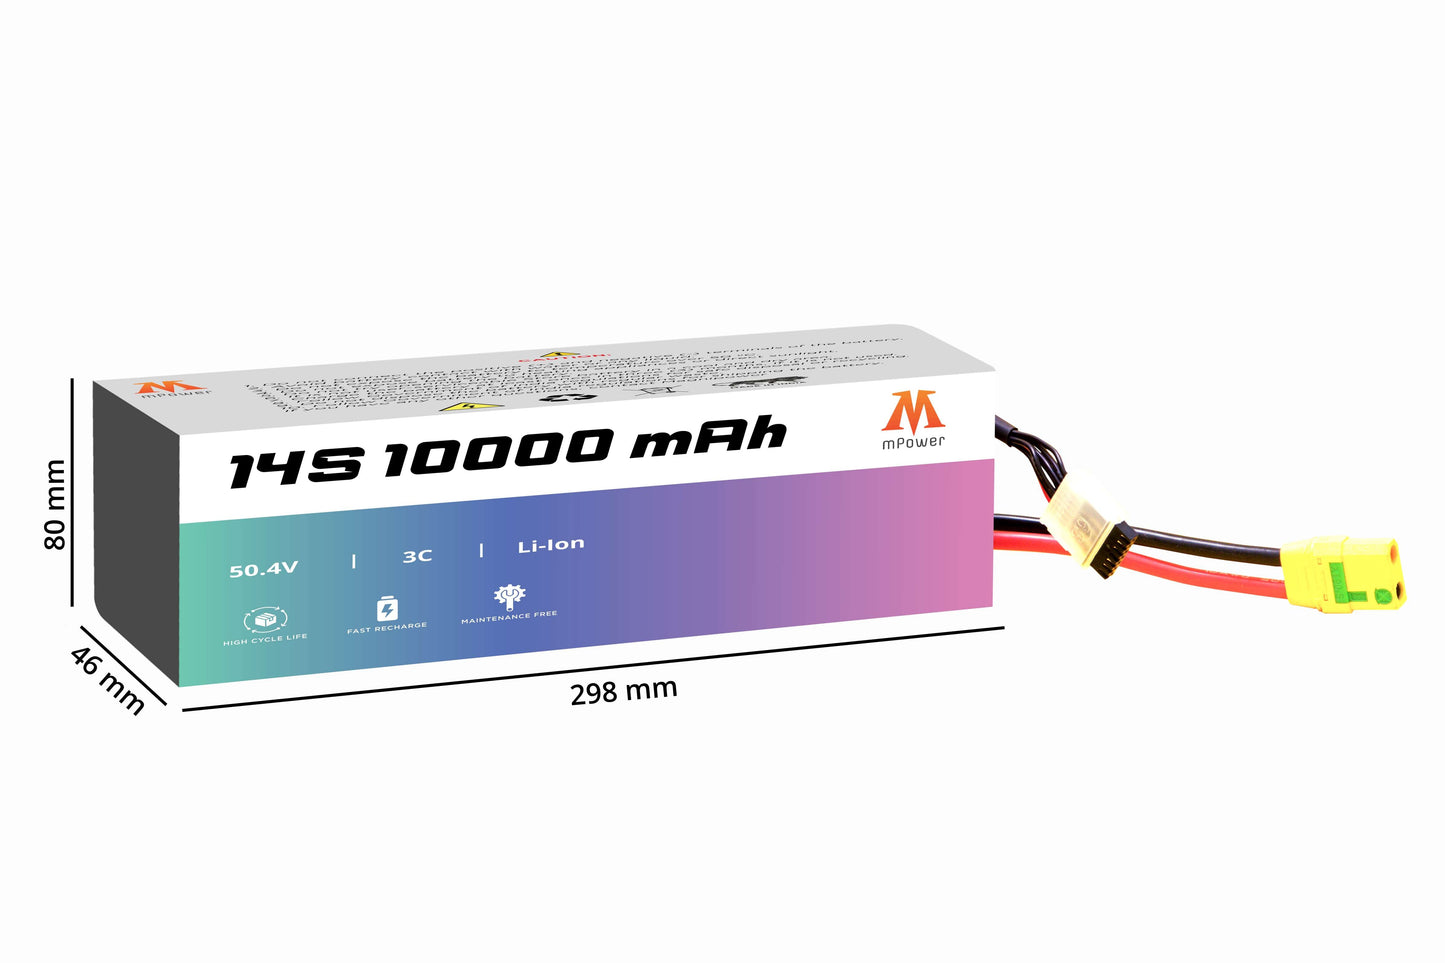 mPower 14S 10000mAh Lithium-Ion Battery for Surveillance Drones